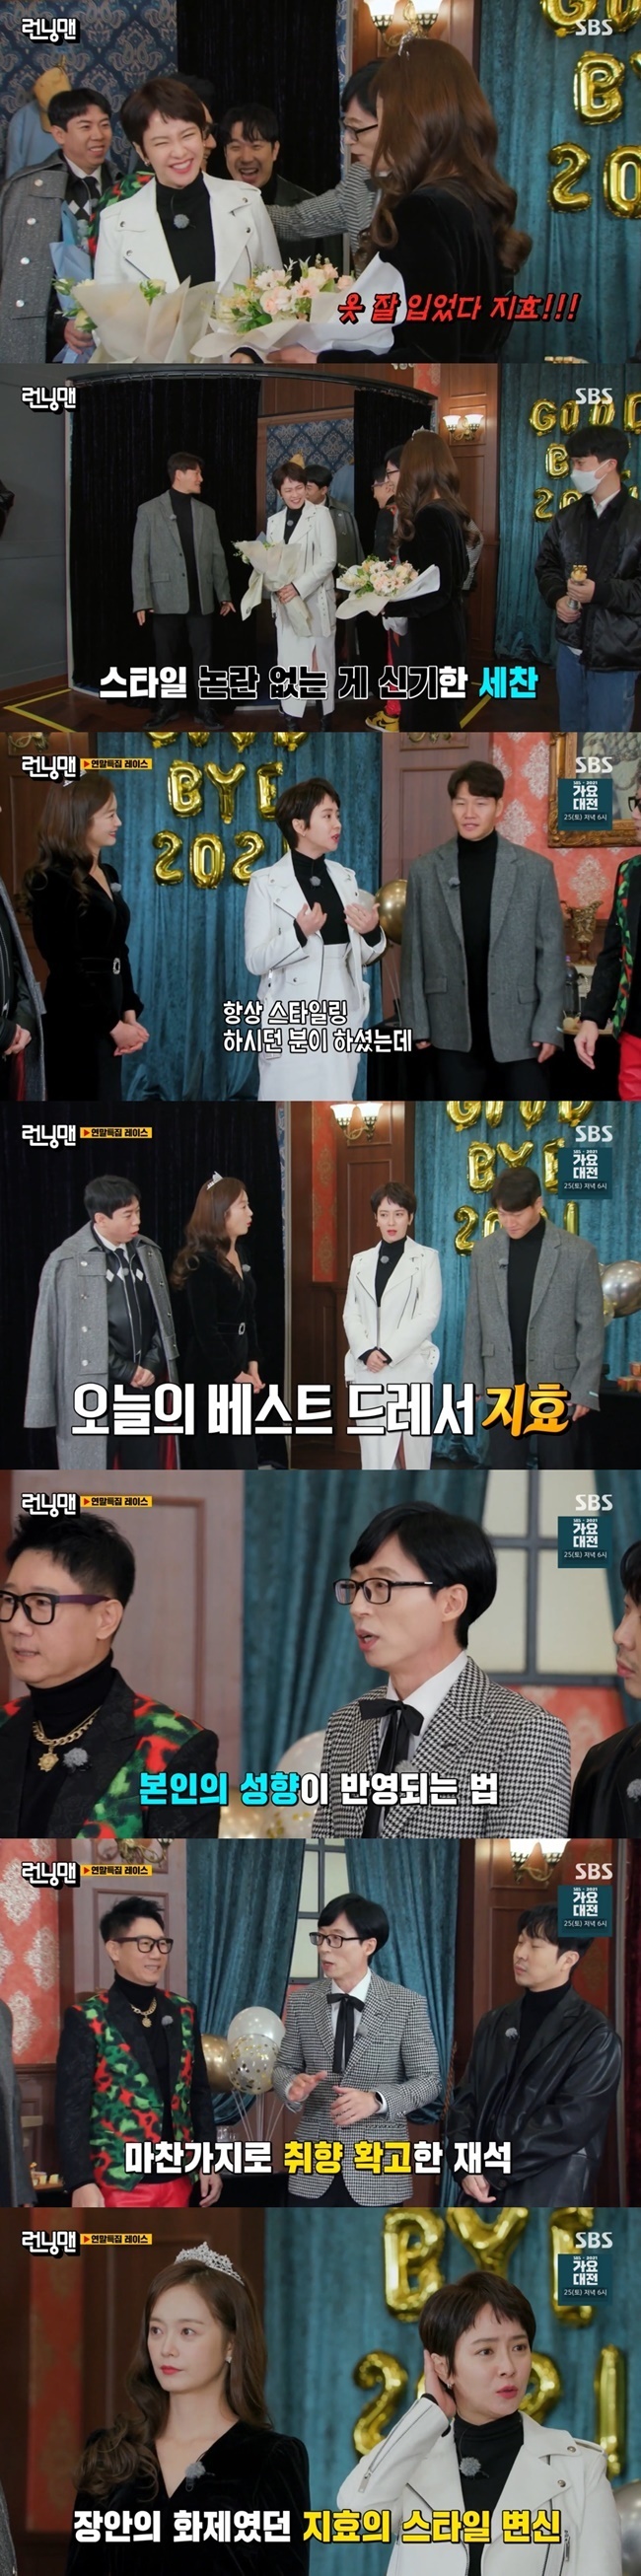 Yoo Jae-Suk mentioned Song Ji-hyos short Sutter and styling controversy.On December 19, SBS Running Man, the members appeared in full costume for the artist award-winning video shoot.Yoo Jae-Suk praised the storm as if he was conscious of something as soon as he came, Jihyo dressed well.You cant wear it, he said to Yang.On the day, Song Ji-hyo showed off a neat look in black and white; Yoo Jae-Suk exclaimed, Im well dressed; Im stylish.Song Ji-hyo said, I always styled it, but I did it according to the concept today.Yoo Jae-Suk explained, Style is a stylist who suffers a lot, but his tendency is a lot.Kim Jong-kook also said, I also wear what I want to wear.The short Sutter controversy also came to light. Does your hair grow fast? Song Ji-hyo said. The members said, It suits you.Haha laughed, Did not Jihyo Beauty Shop finally move to your brother? Kim Jong-kook said, Are you a blue club?Then Song Ji-hyo tactfully responded, Im a Barber Shop.Earlier, after Song Ji-hyo turned into Short Sutter, some fans complained, issuing a statement titled I urge you to improve Song Ji-hyos styling (cody/hair/make-up).Since then, Song Ji-hyos bottom of the coat has been torn off, and another styling controversy has arisen.